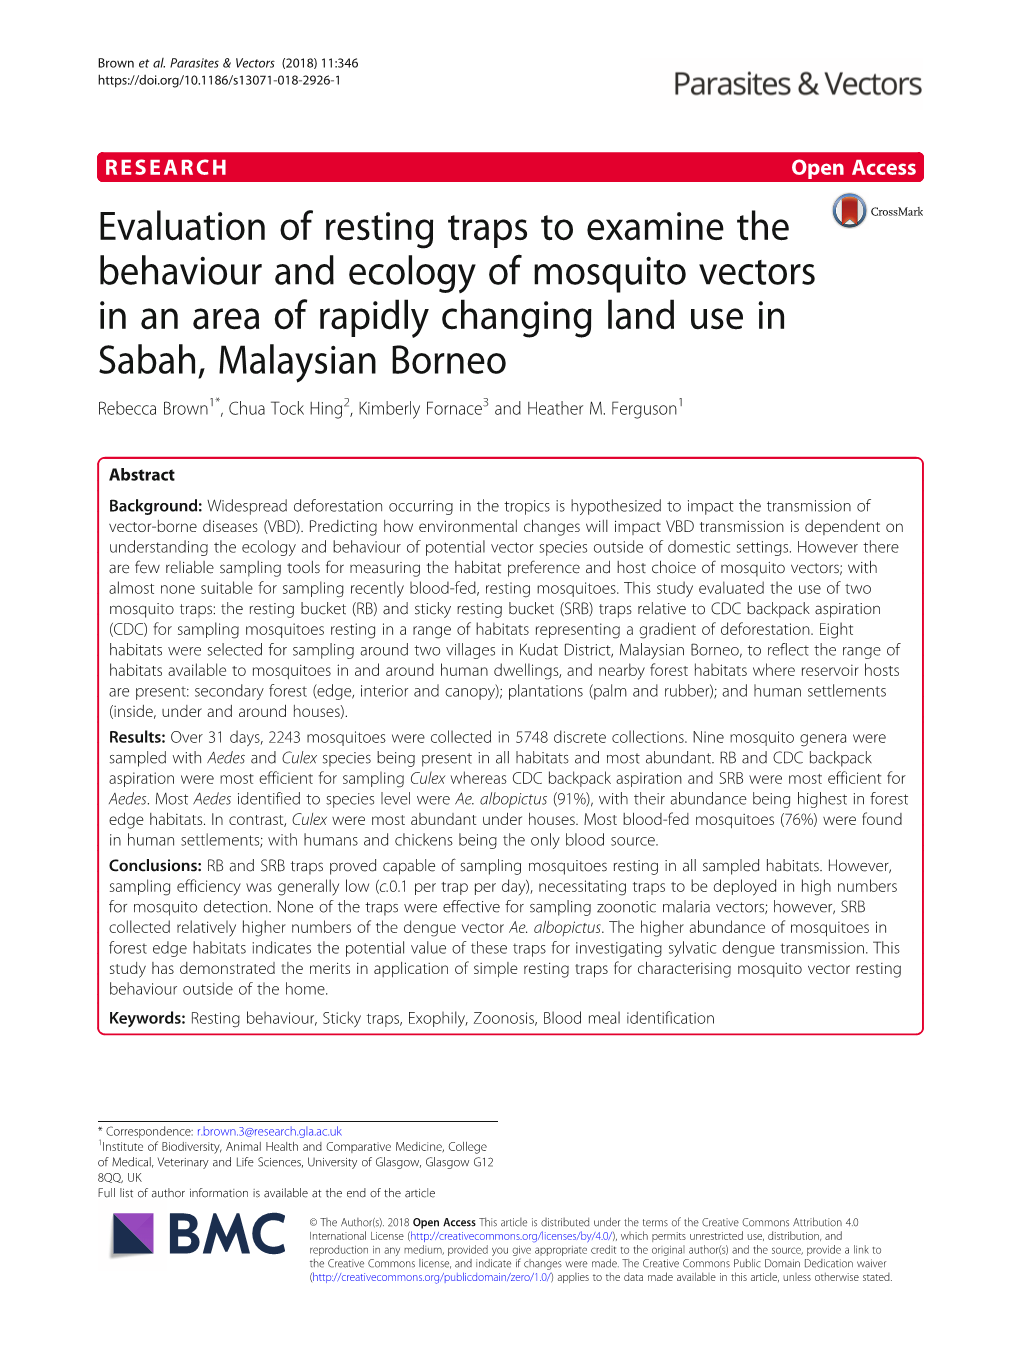 Evaluation of Resting Traps to Examine the Behaviour and Ecology Of